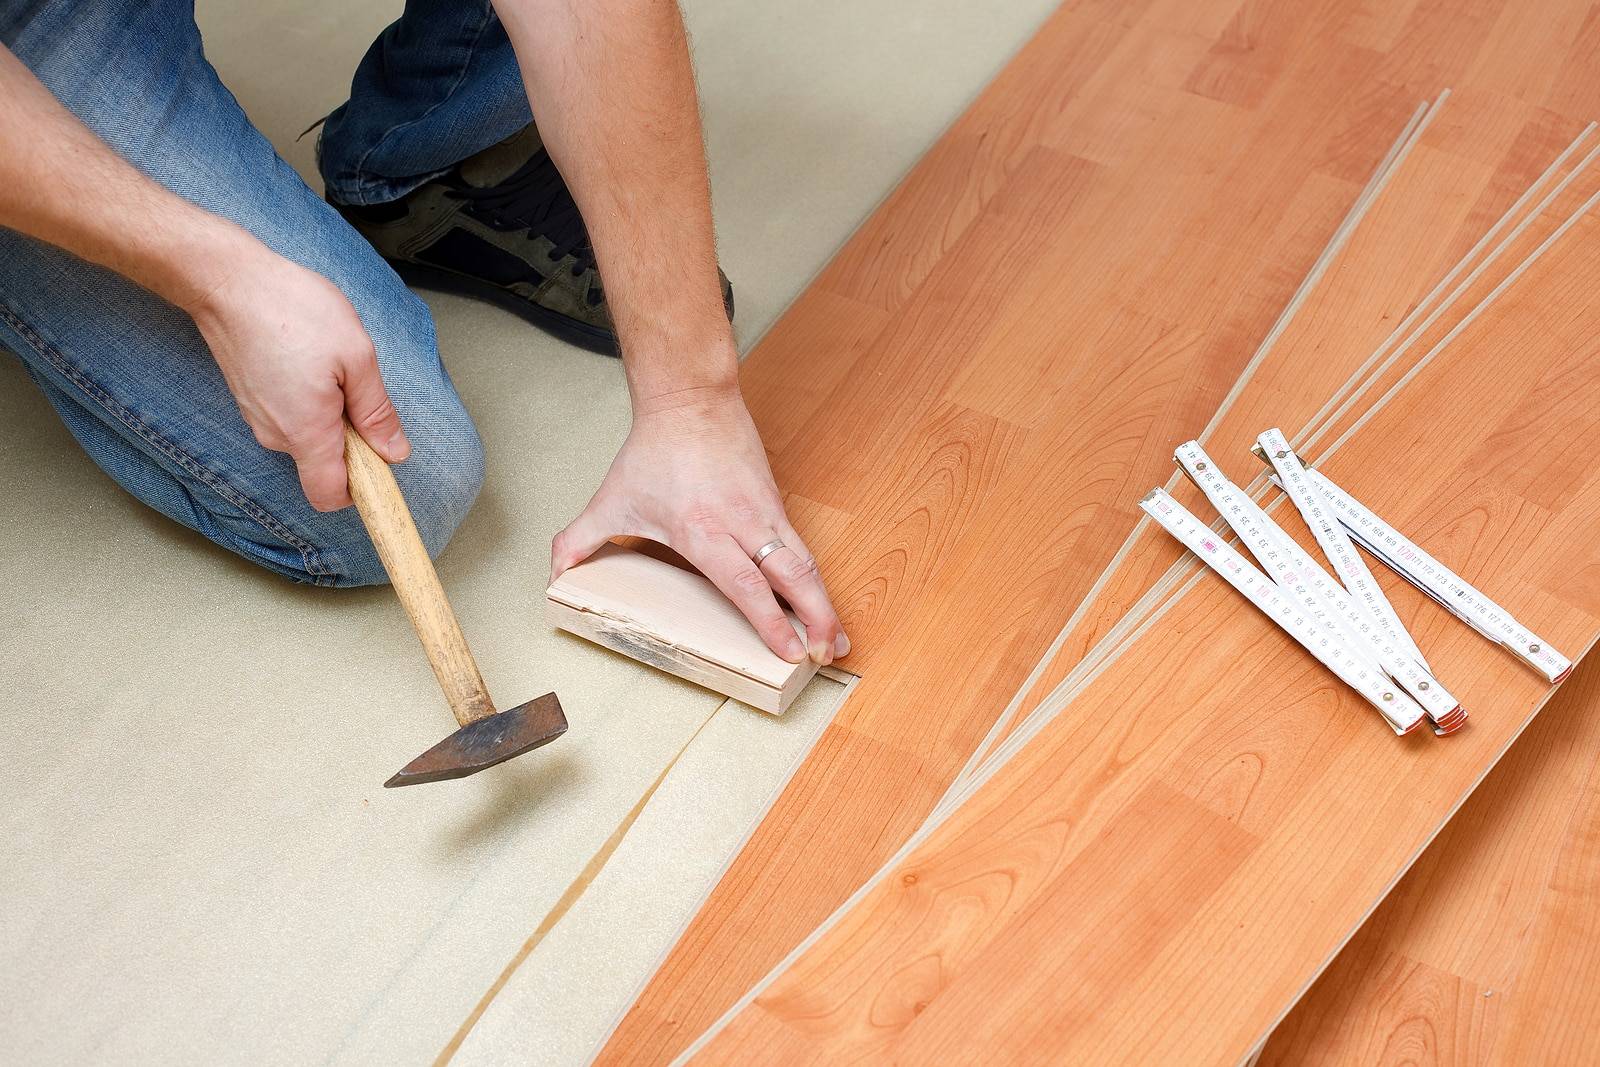 How You Should Prep Your Home for New Flooring